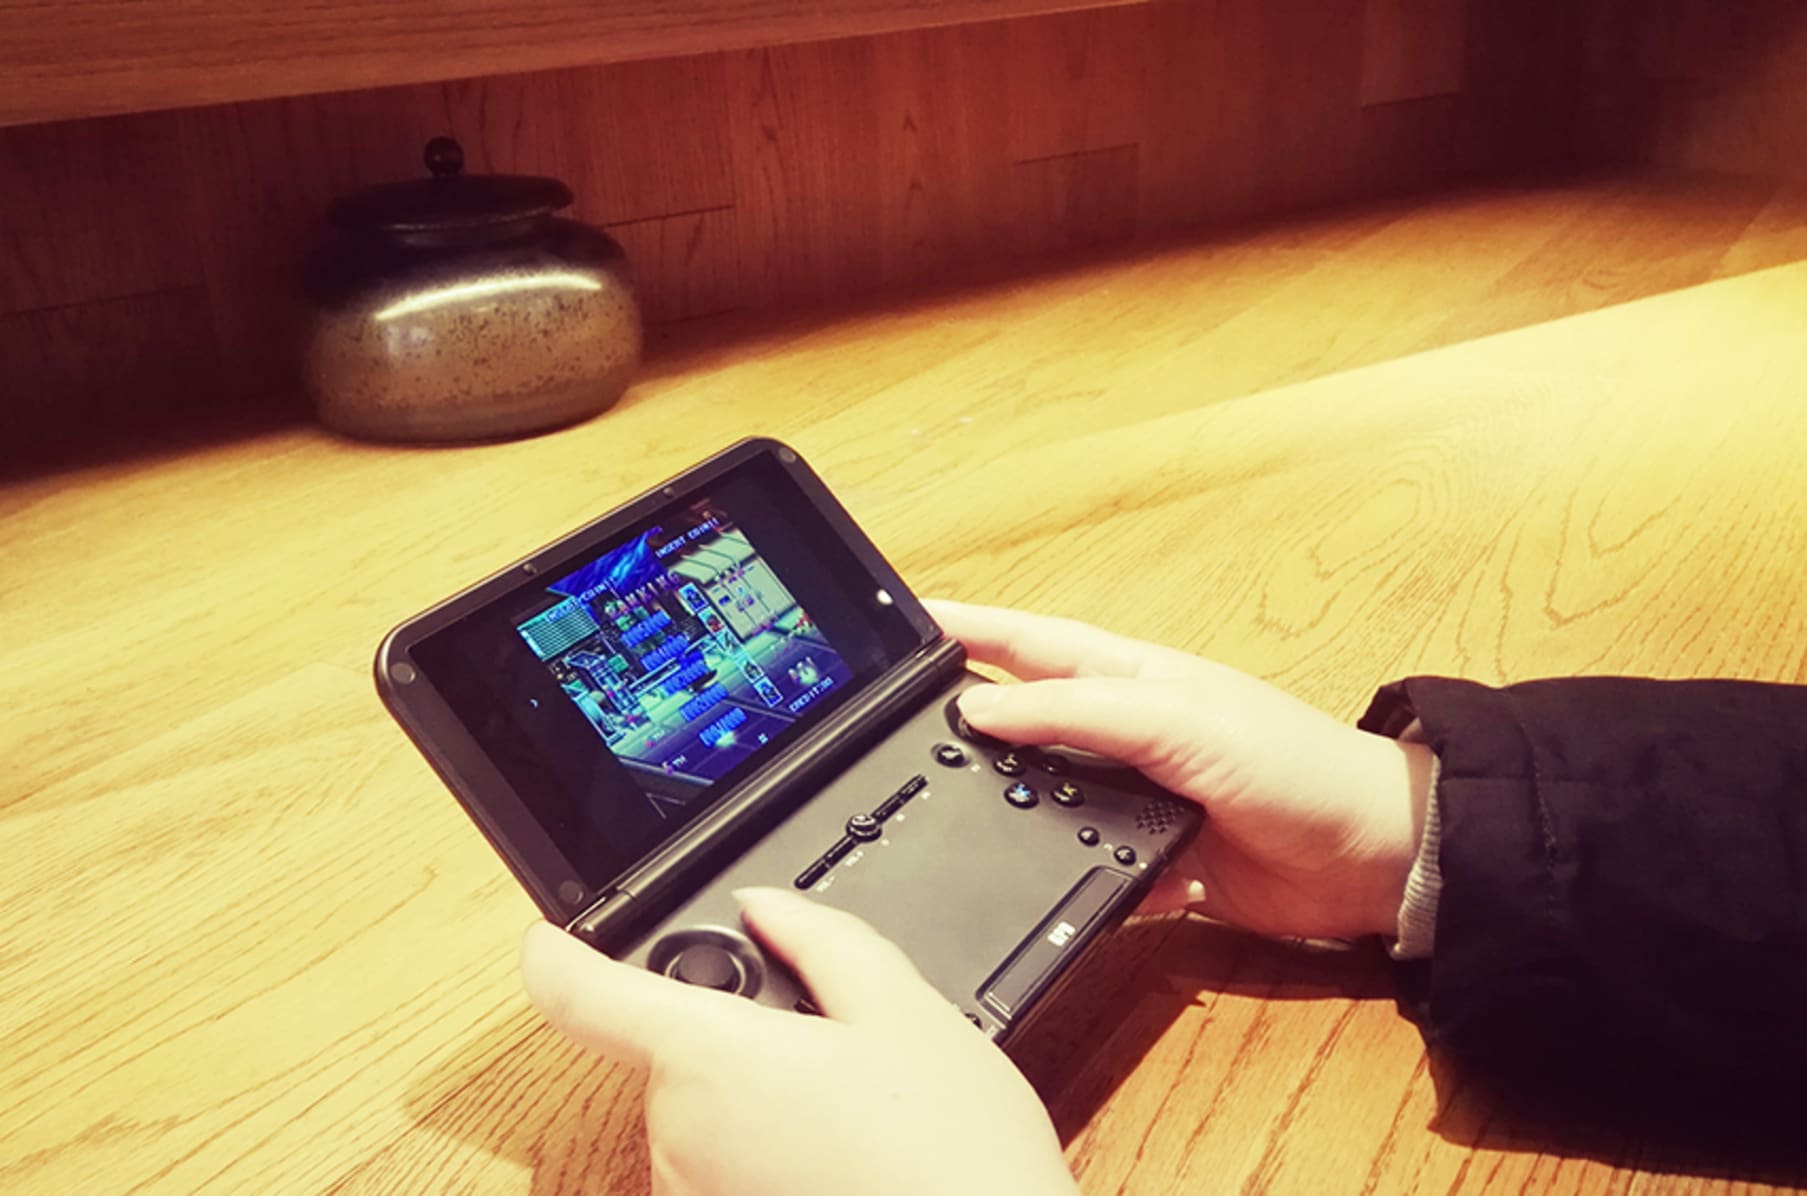 GPD XD Plus 5 Inch 6 core Handheld Game Console | Indiegogo